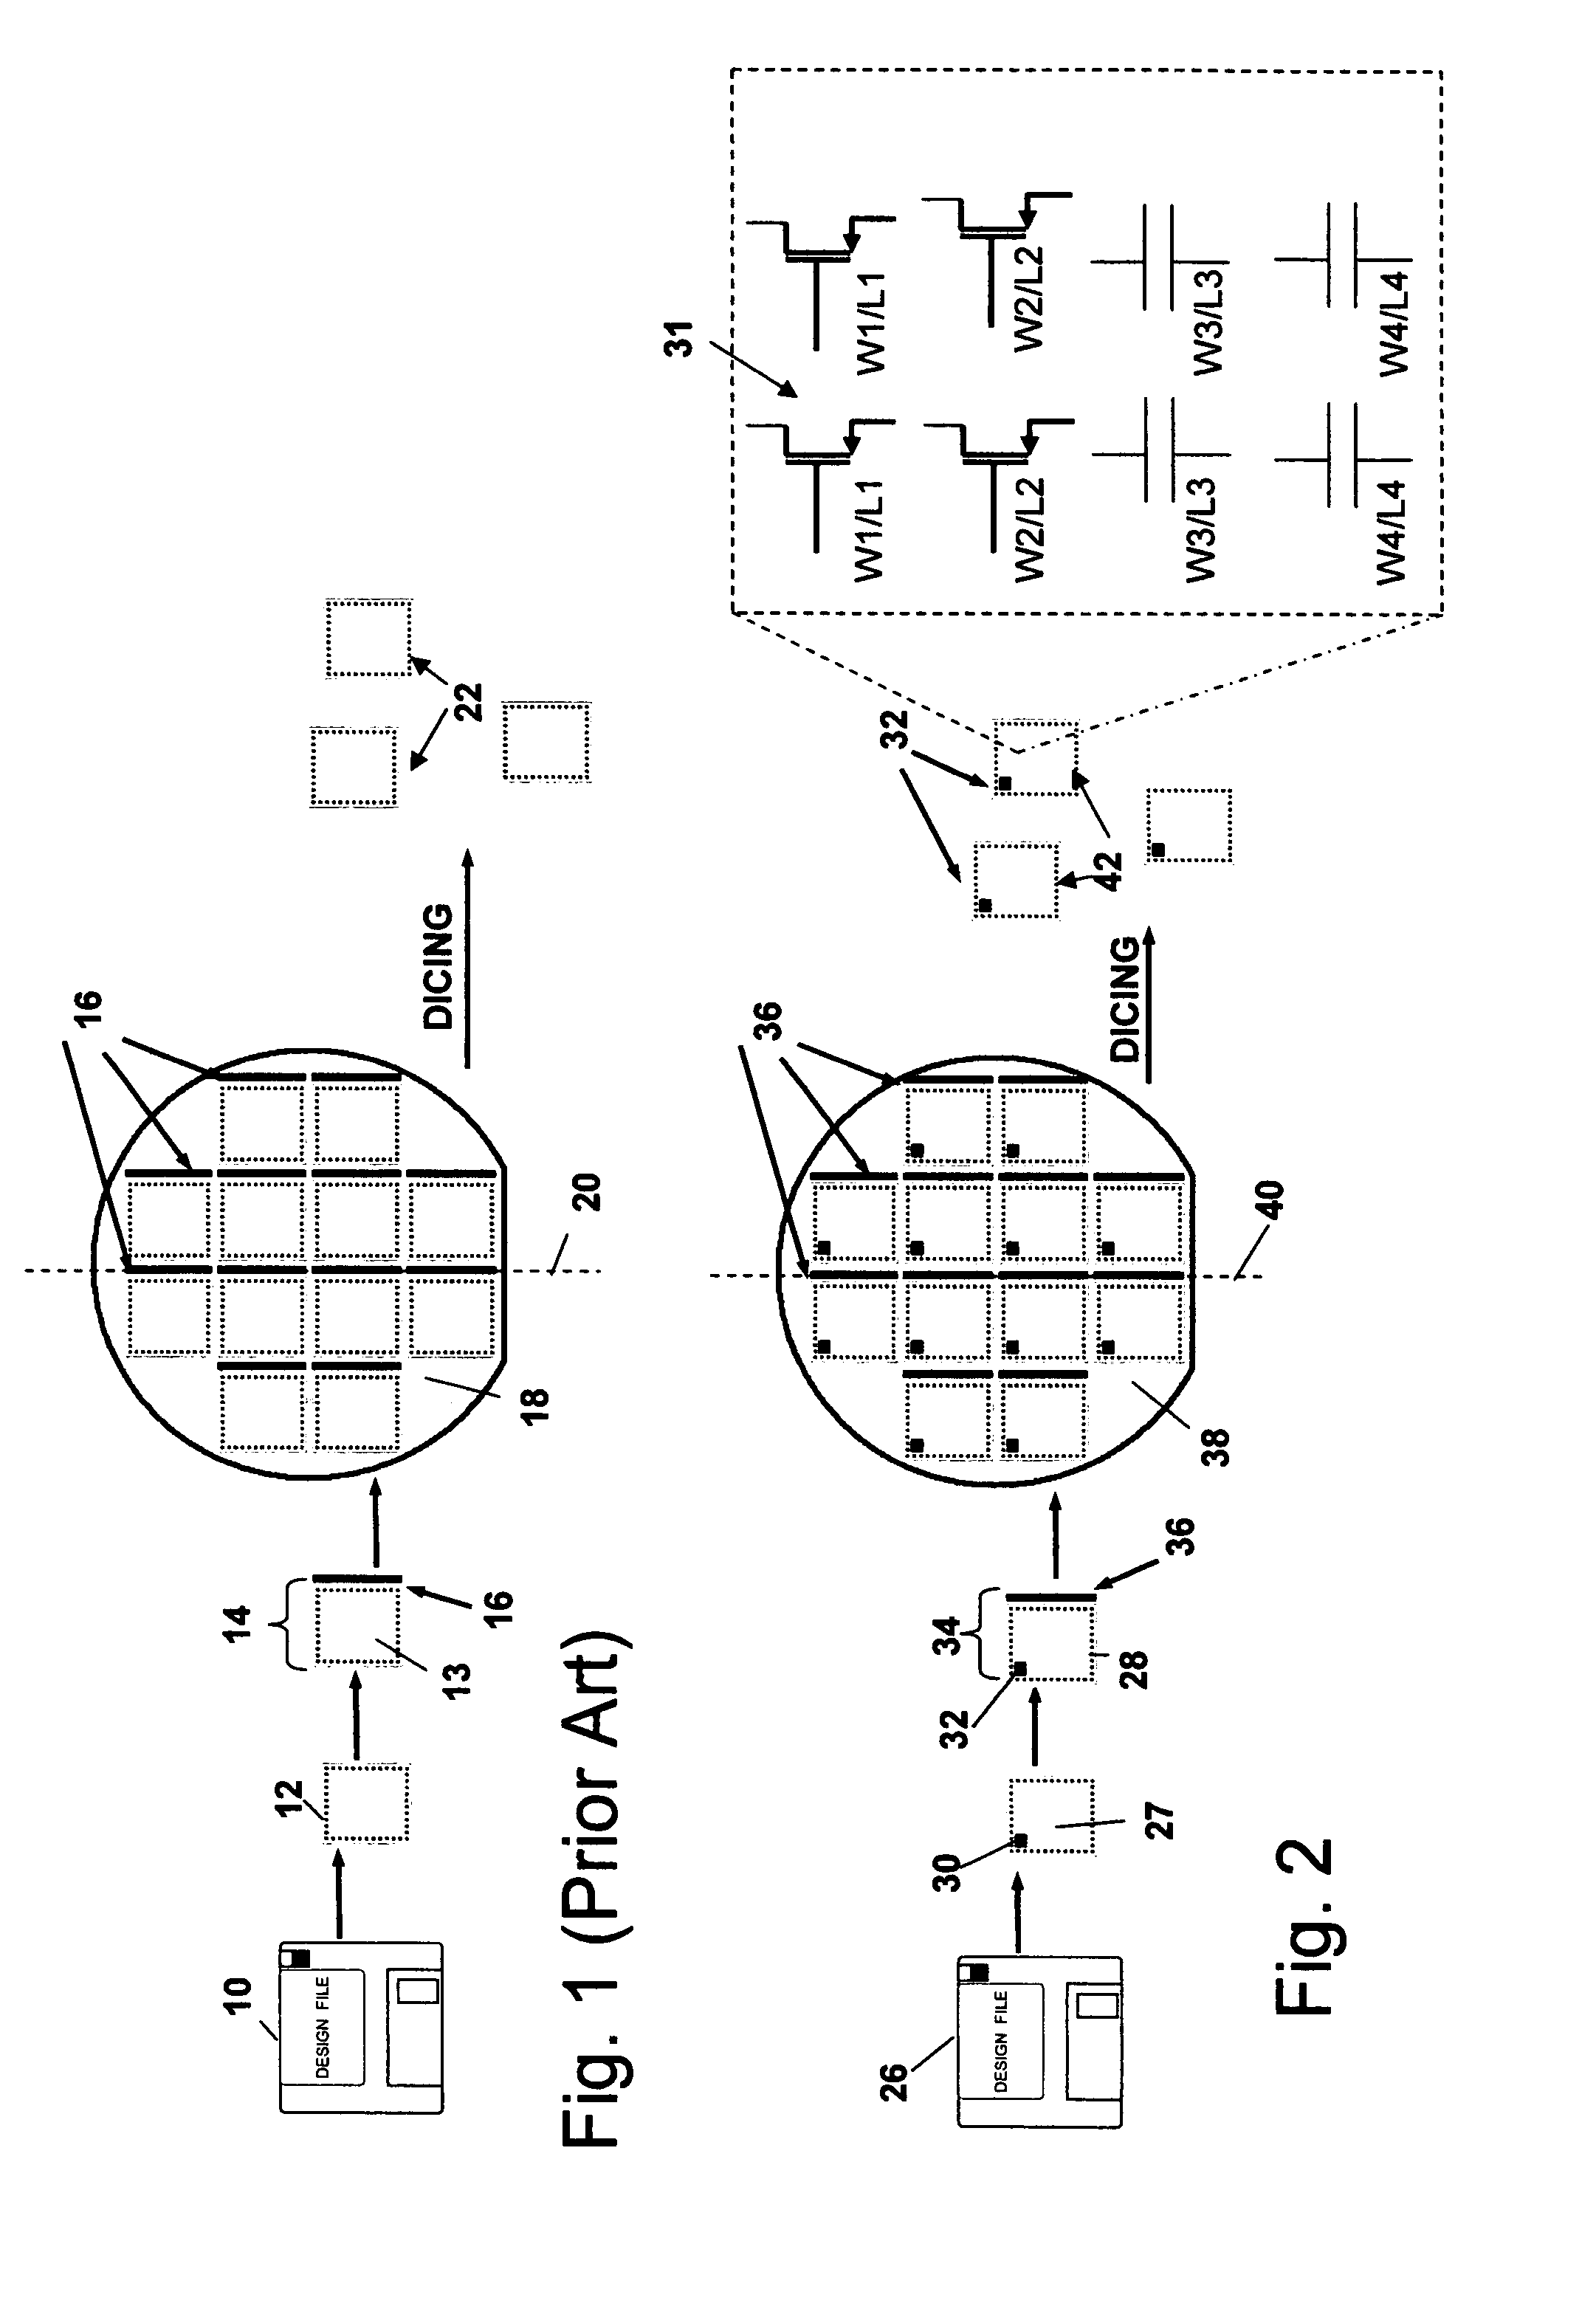 Die-level process monitor and method